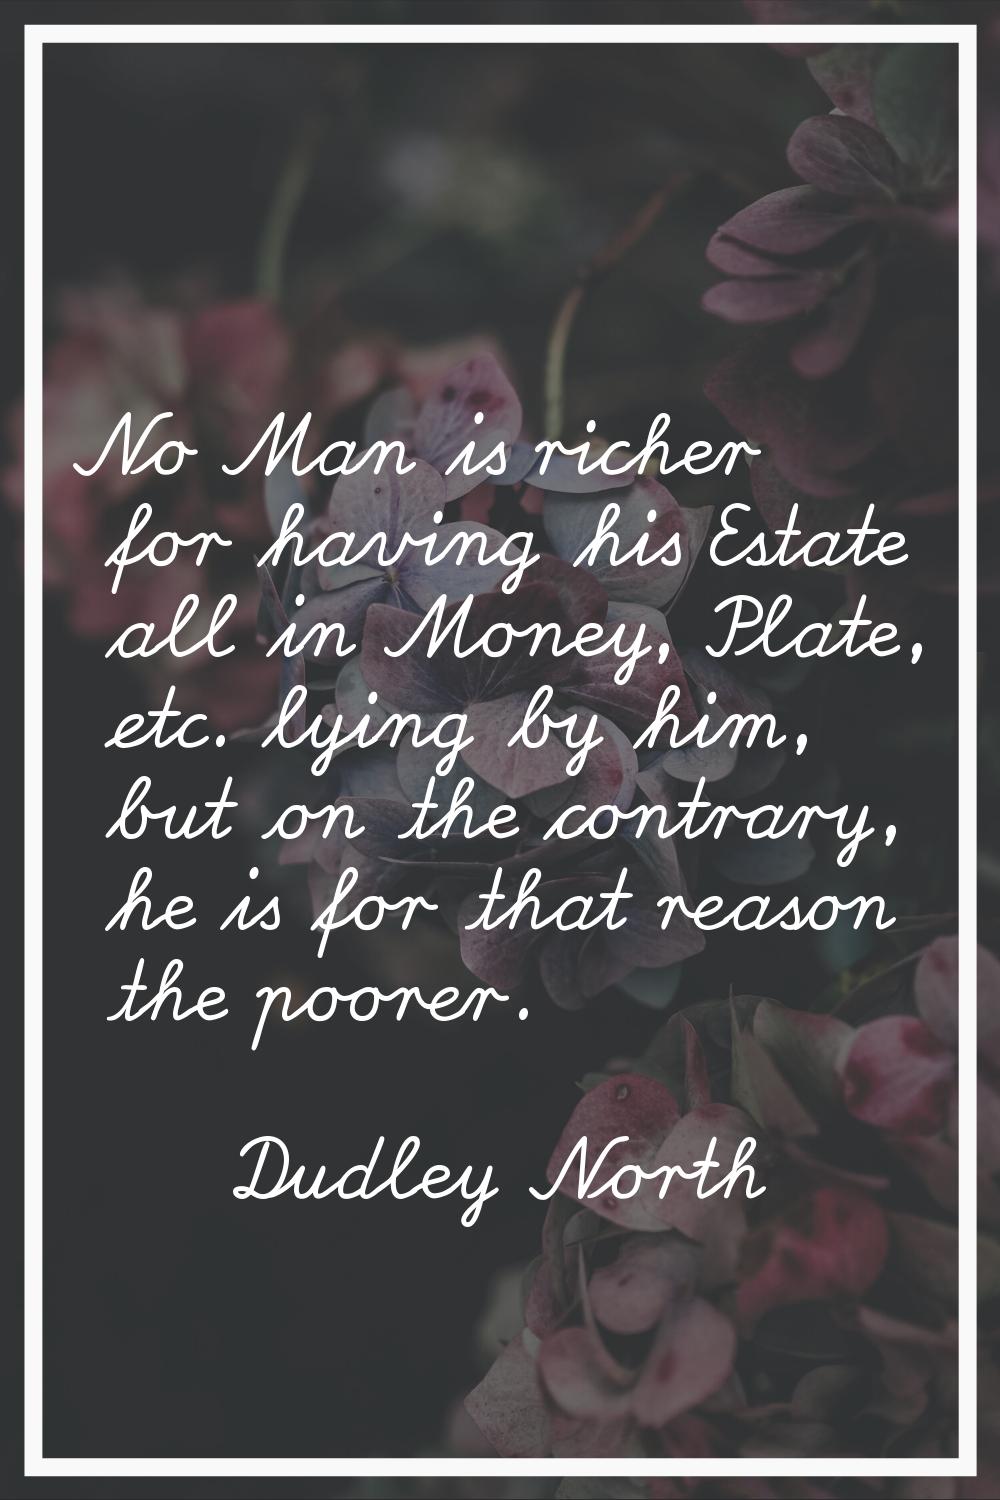 No Man is richer for having his Estate all in Money, Plate, etc. lying by him, but on the contrary,